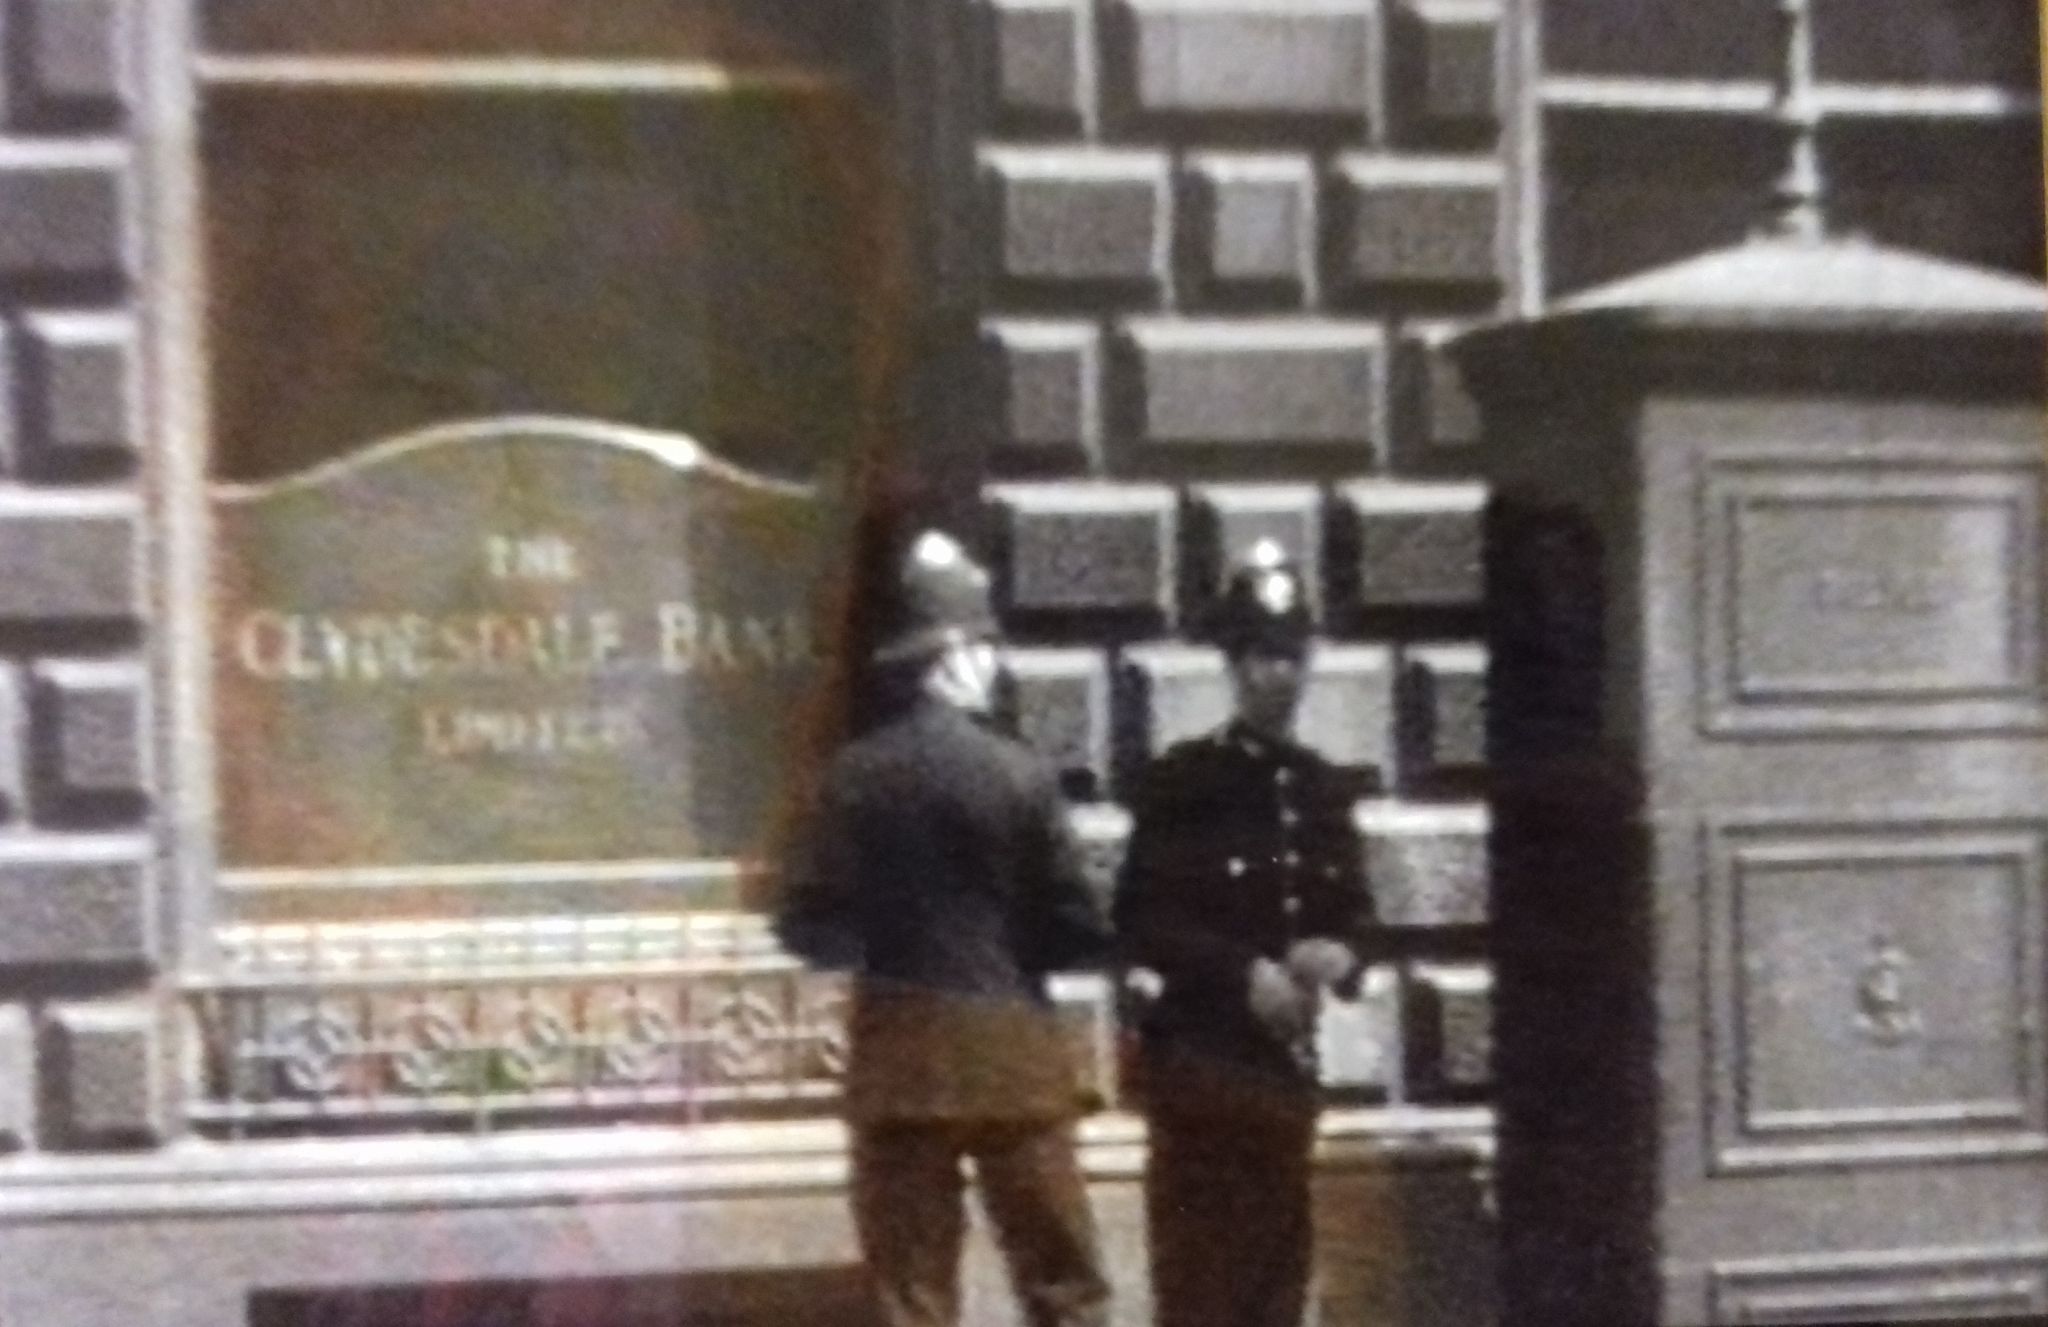 A4--Clydesdale Bank Box photo included in museum exhibit.jpg